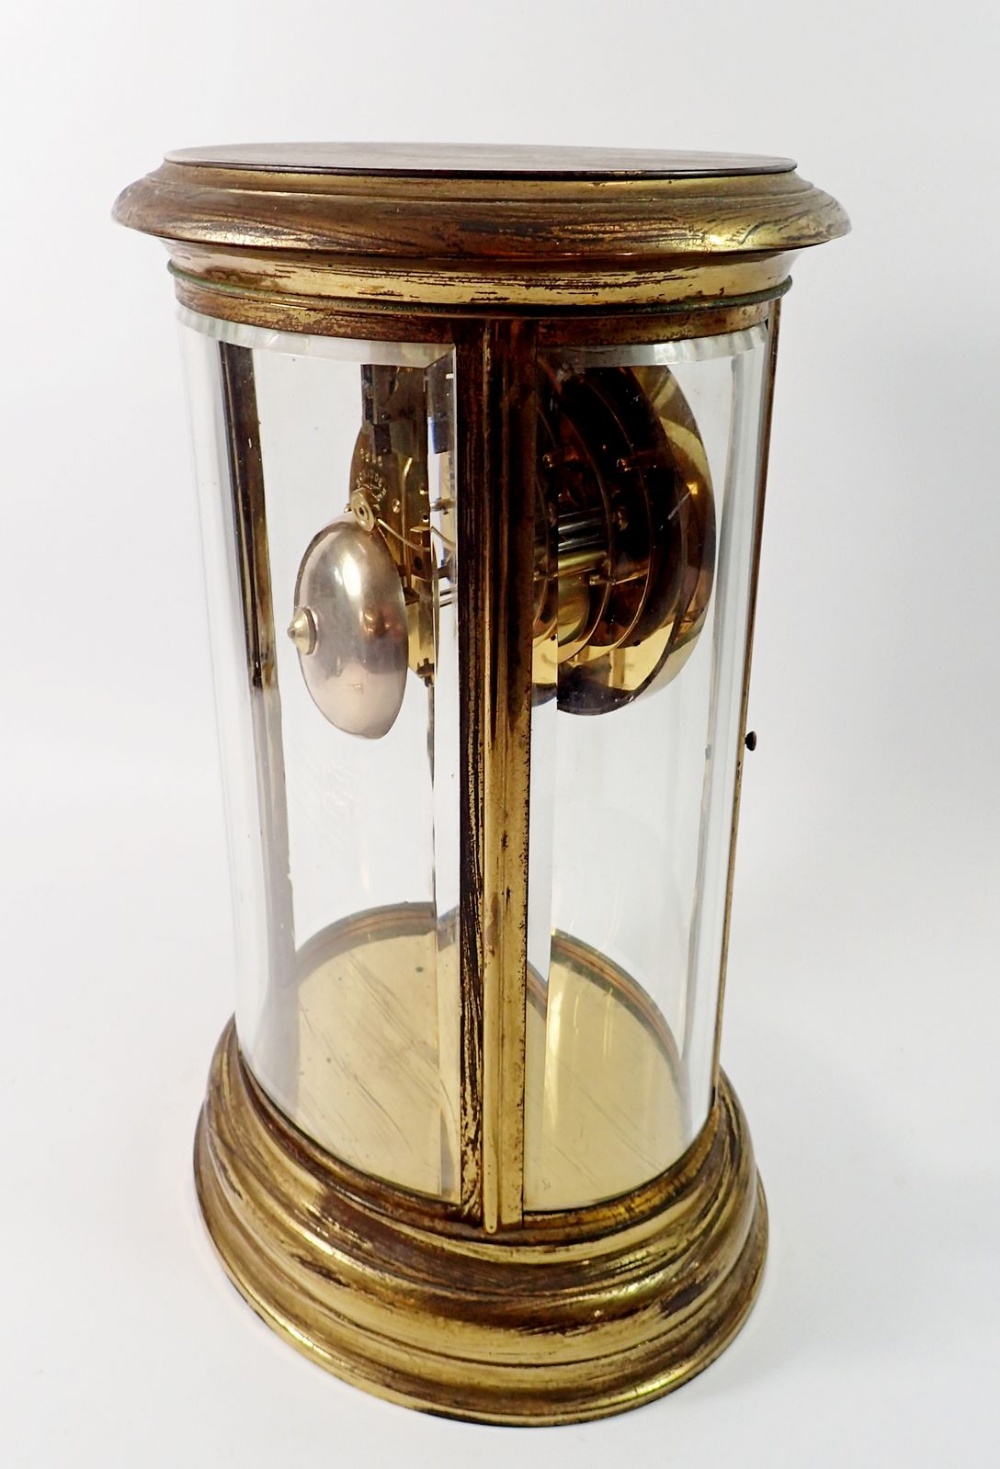 A fine 19th century French oval four glass mantel clock with mercury compensated pendulum by Chaude, - Image 4 of 5